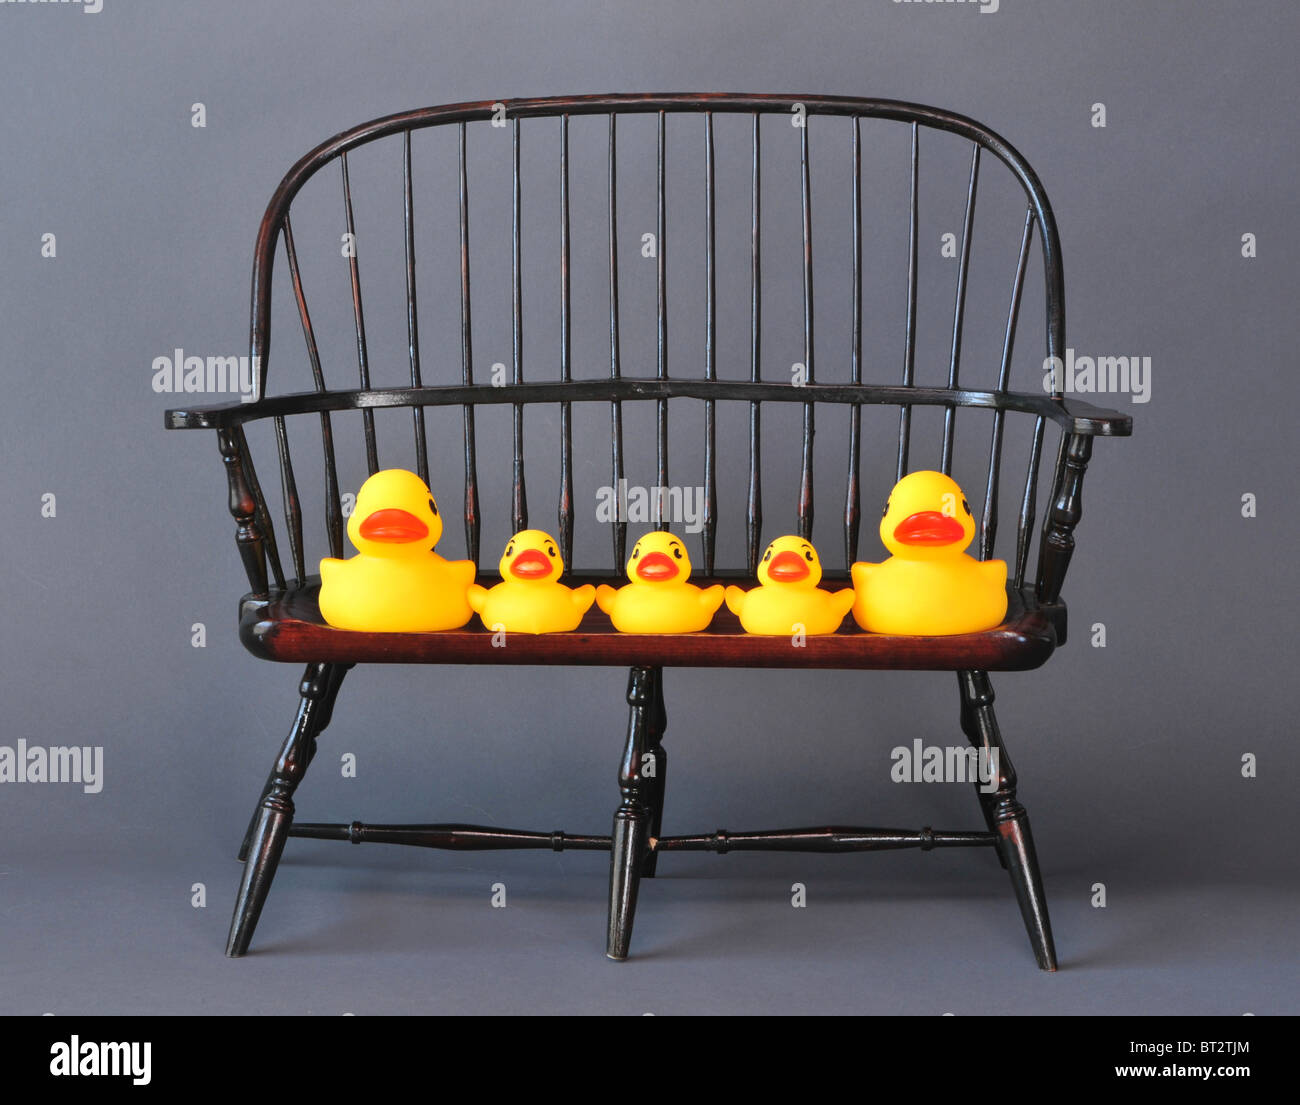 Little yellow rubber duckies setting in a chair. Stock Photo